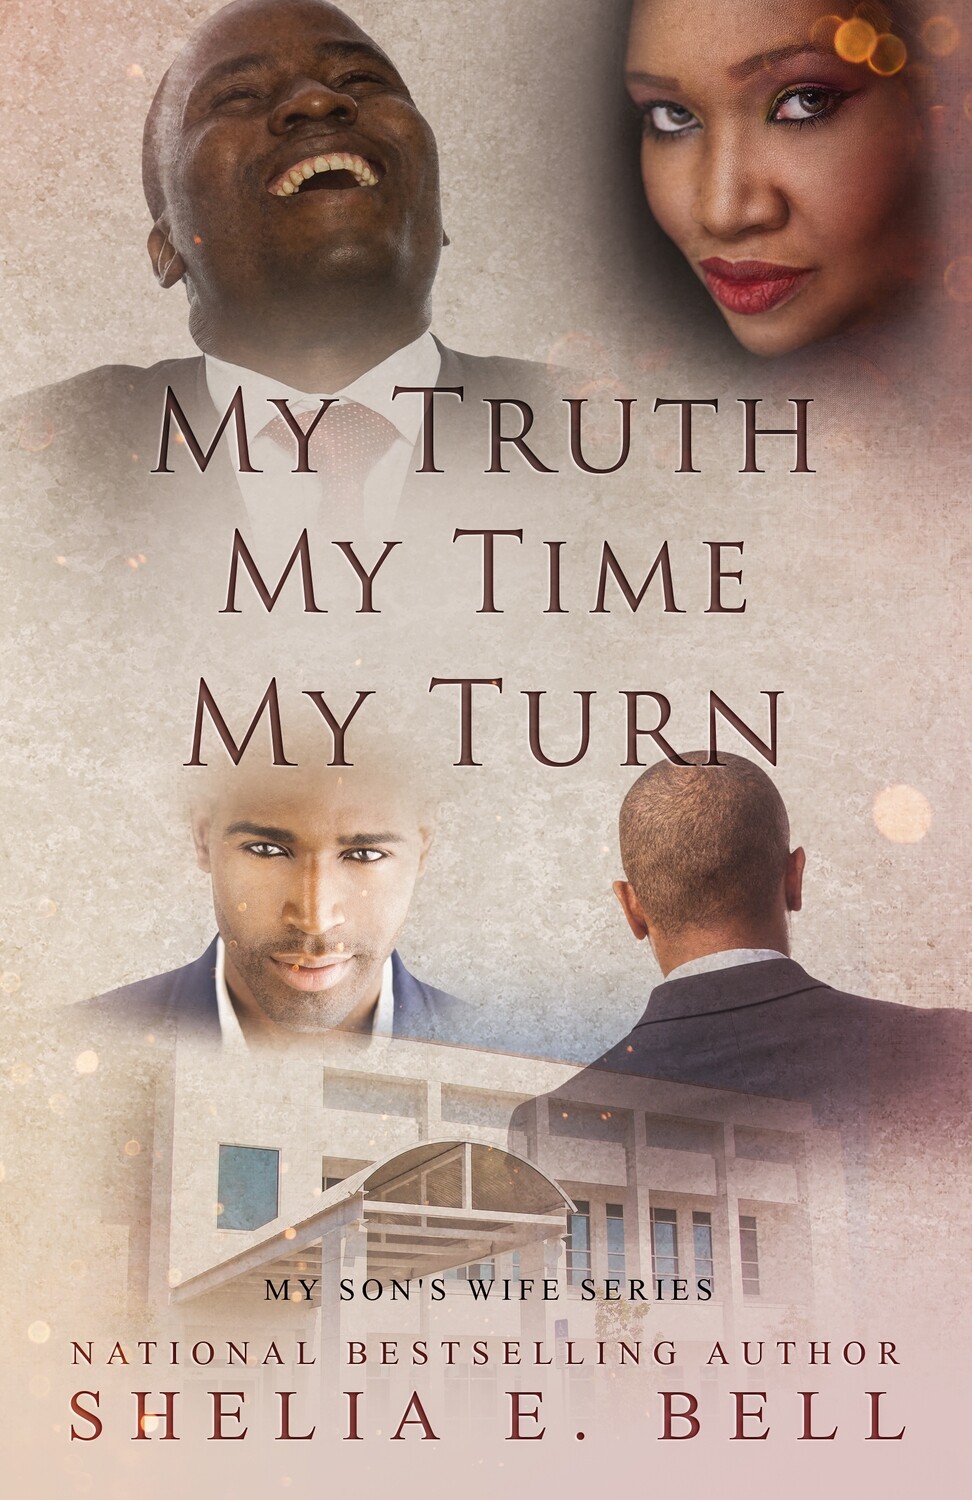 MY TRUTH MY TIME MY TURN Book 9)